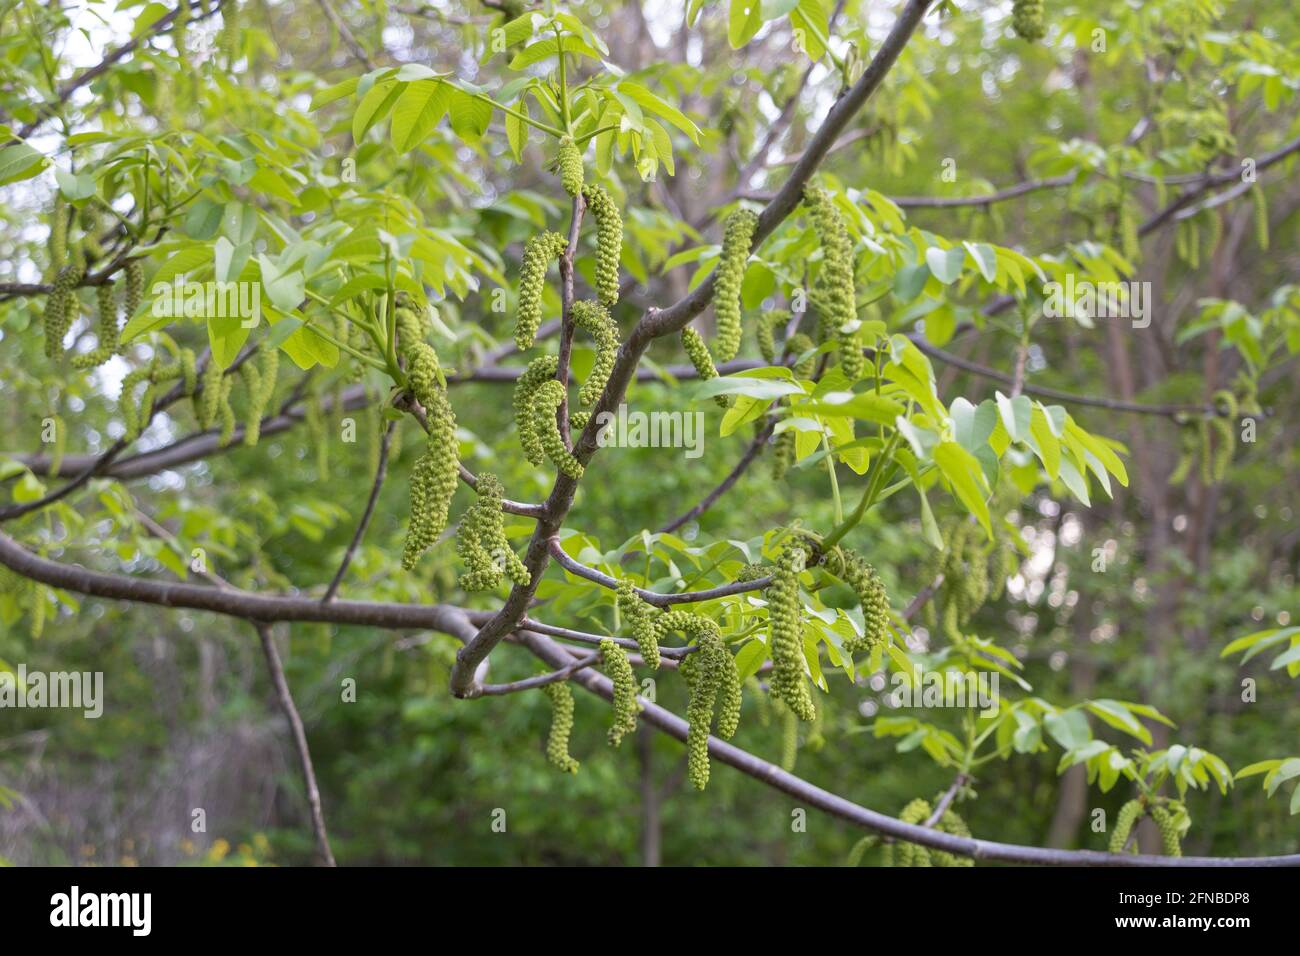 Beautiful walnut tree in bloom - green and elongated flowers on branches. Stock Photo